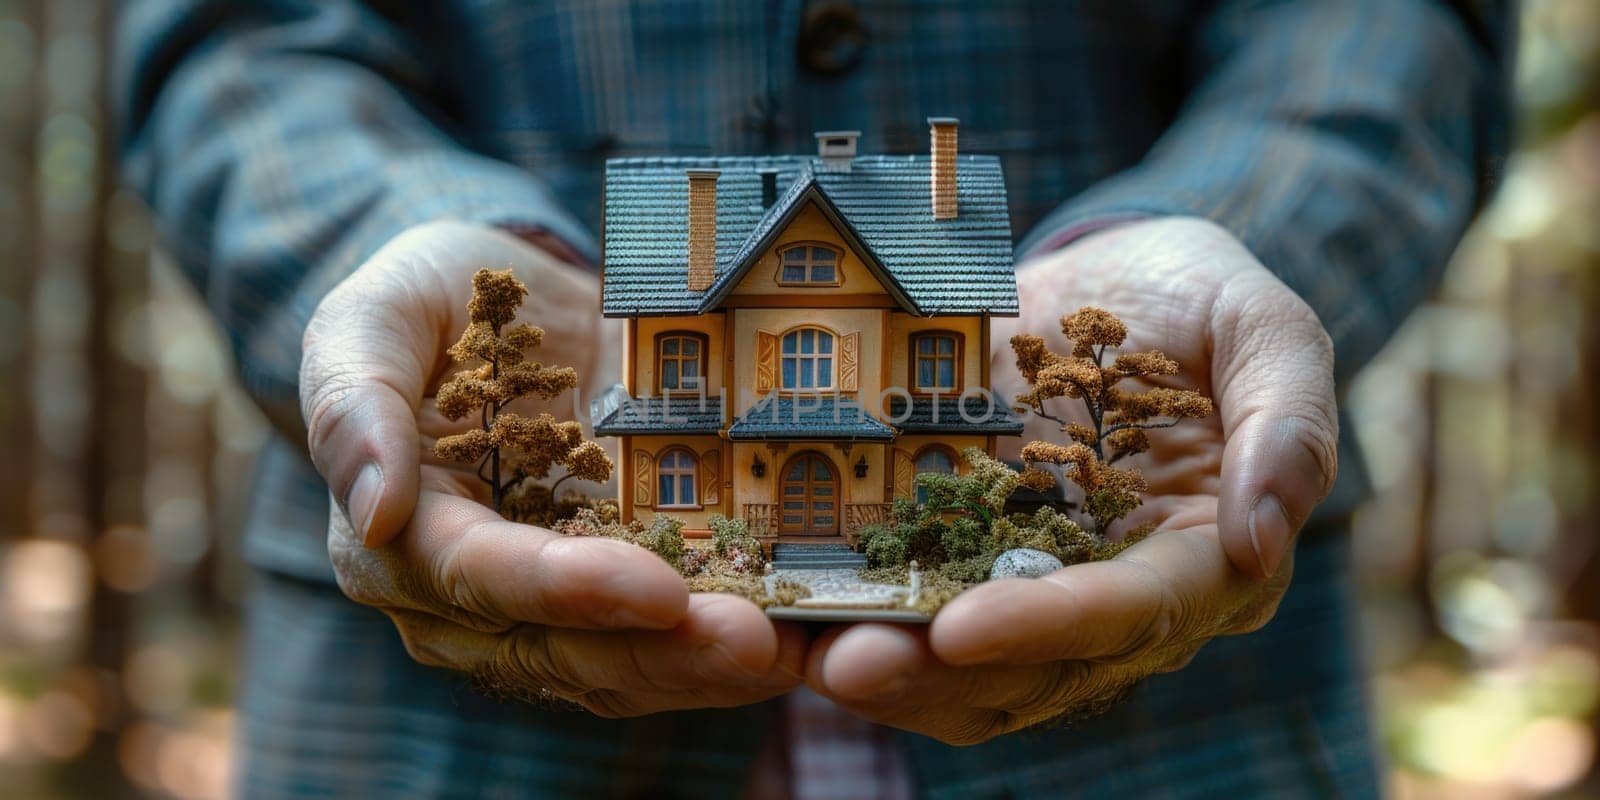 A person holds a small house in their hands, symbolizing homeownership, real estate, and property investment.